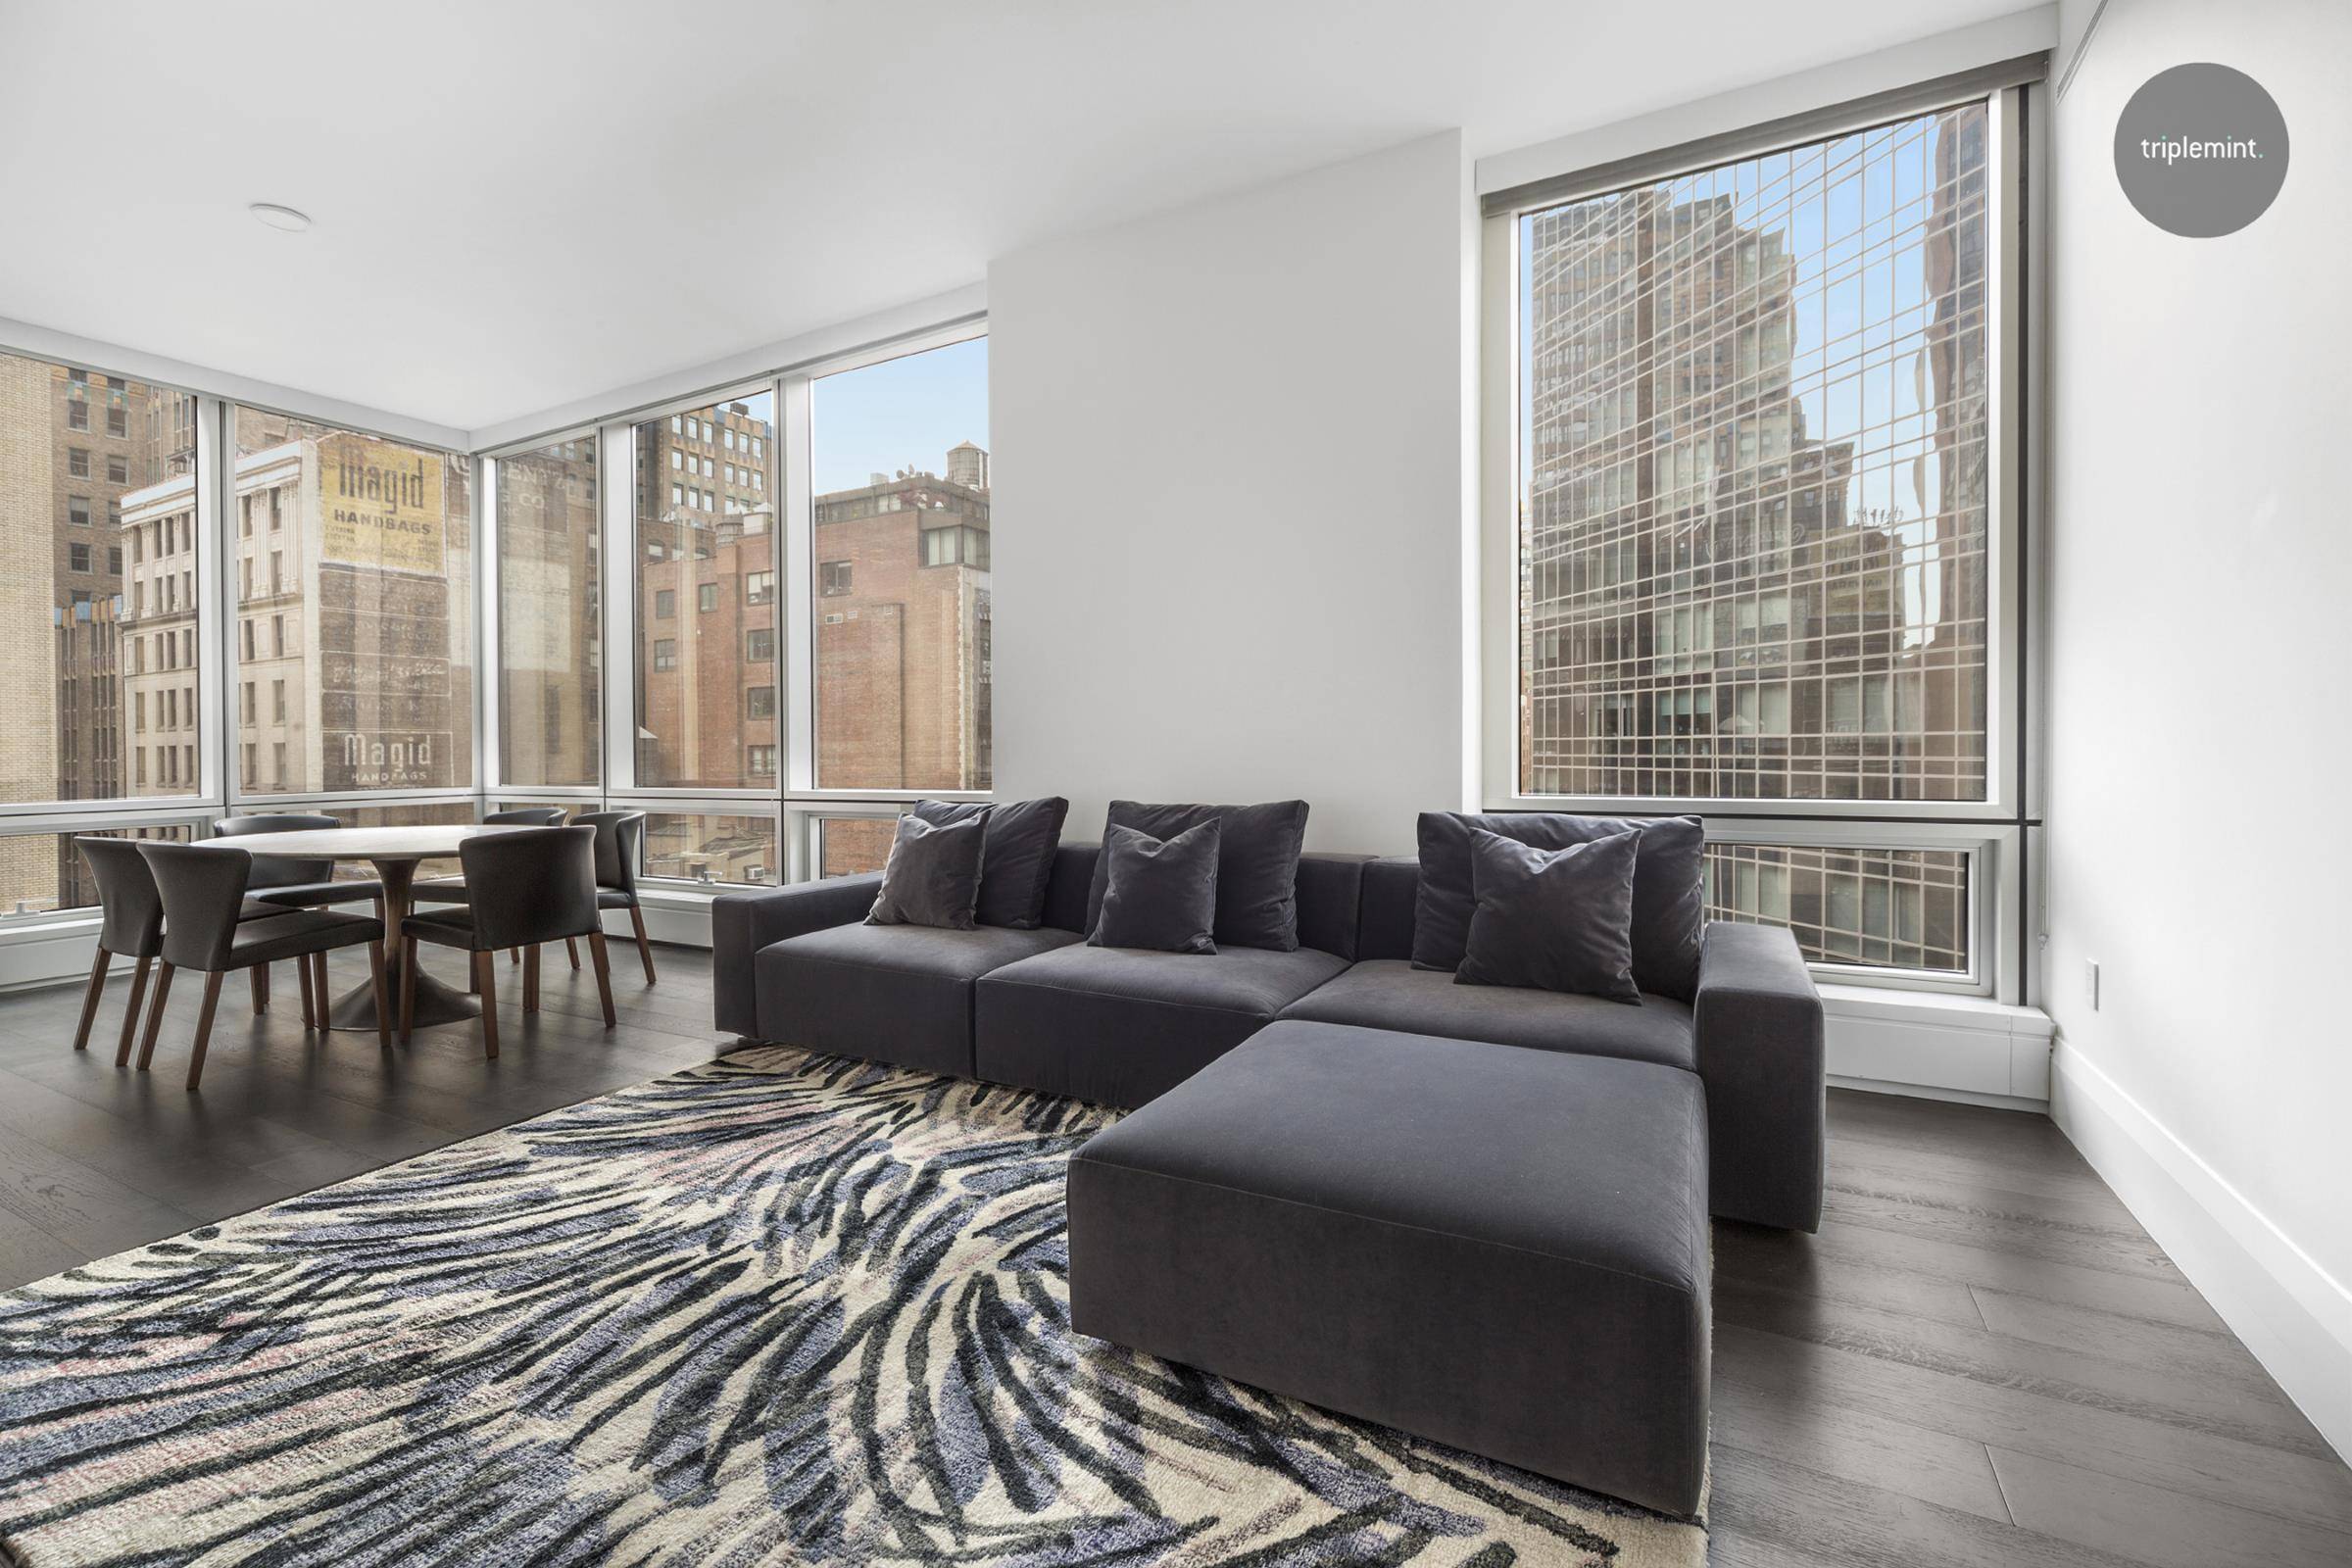 Apartment 7A at 172 Madison Avenue is one of the most impressive furnished luxury residences currently offered in Manhattan.